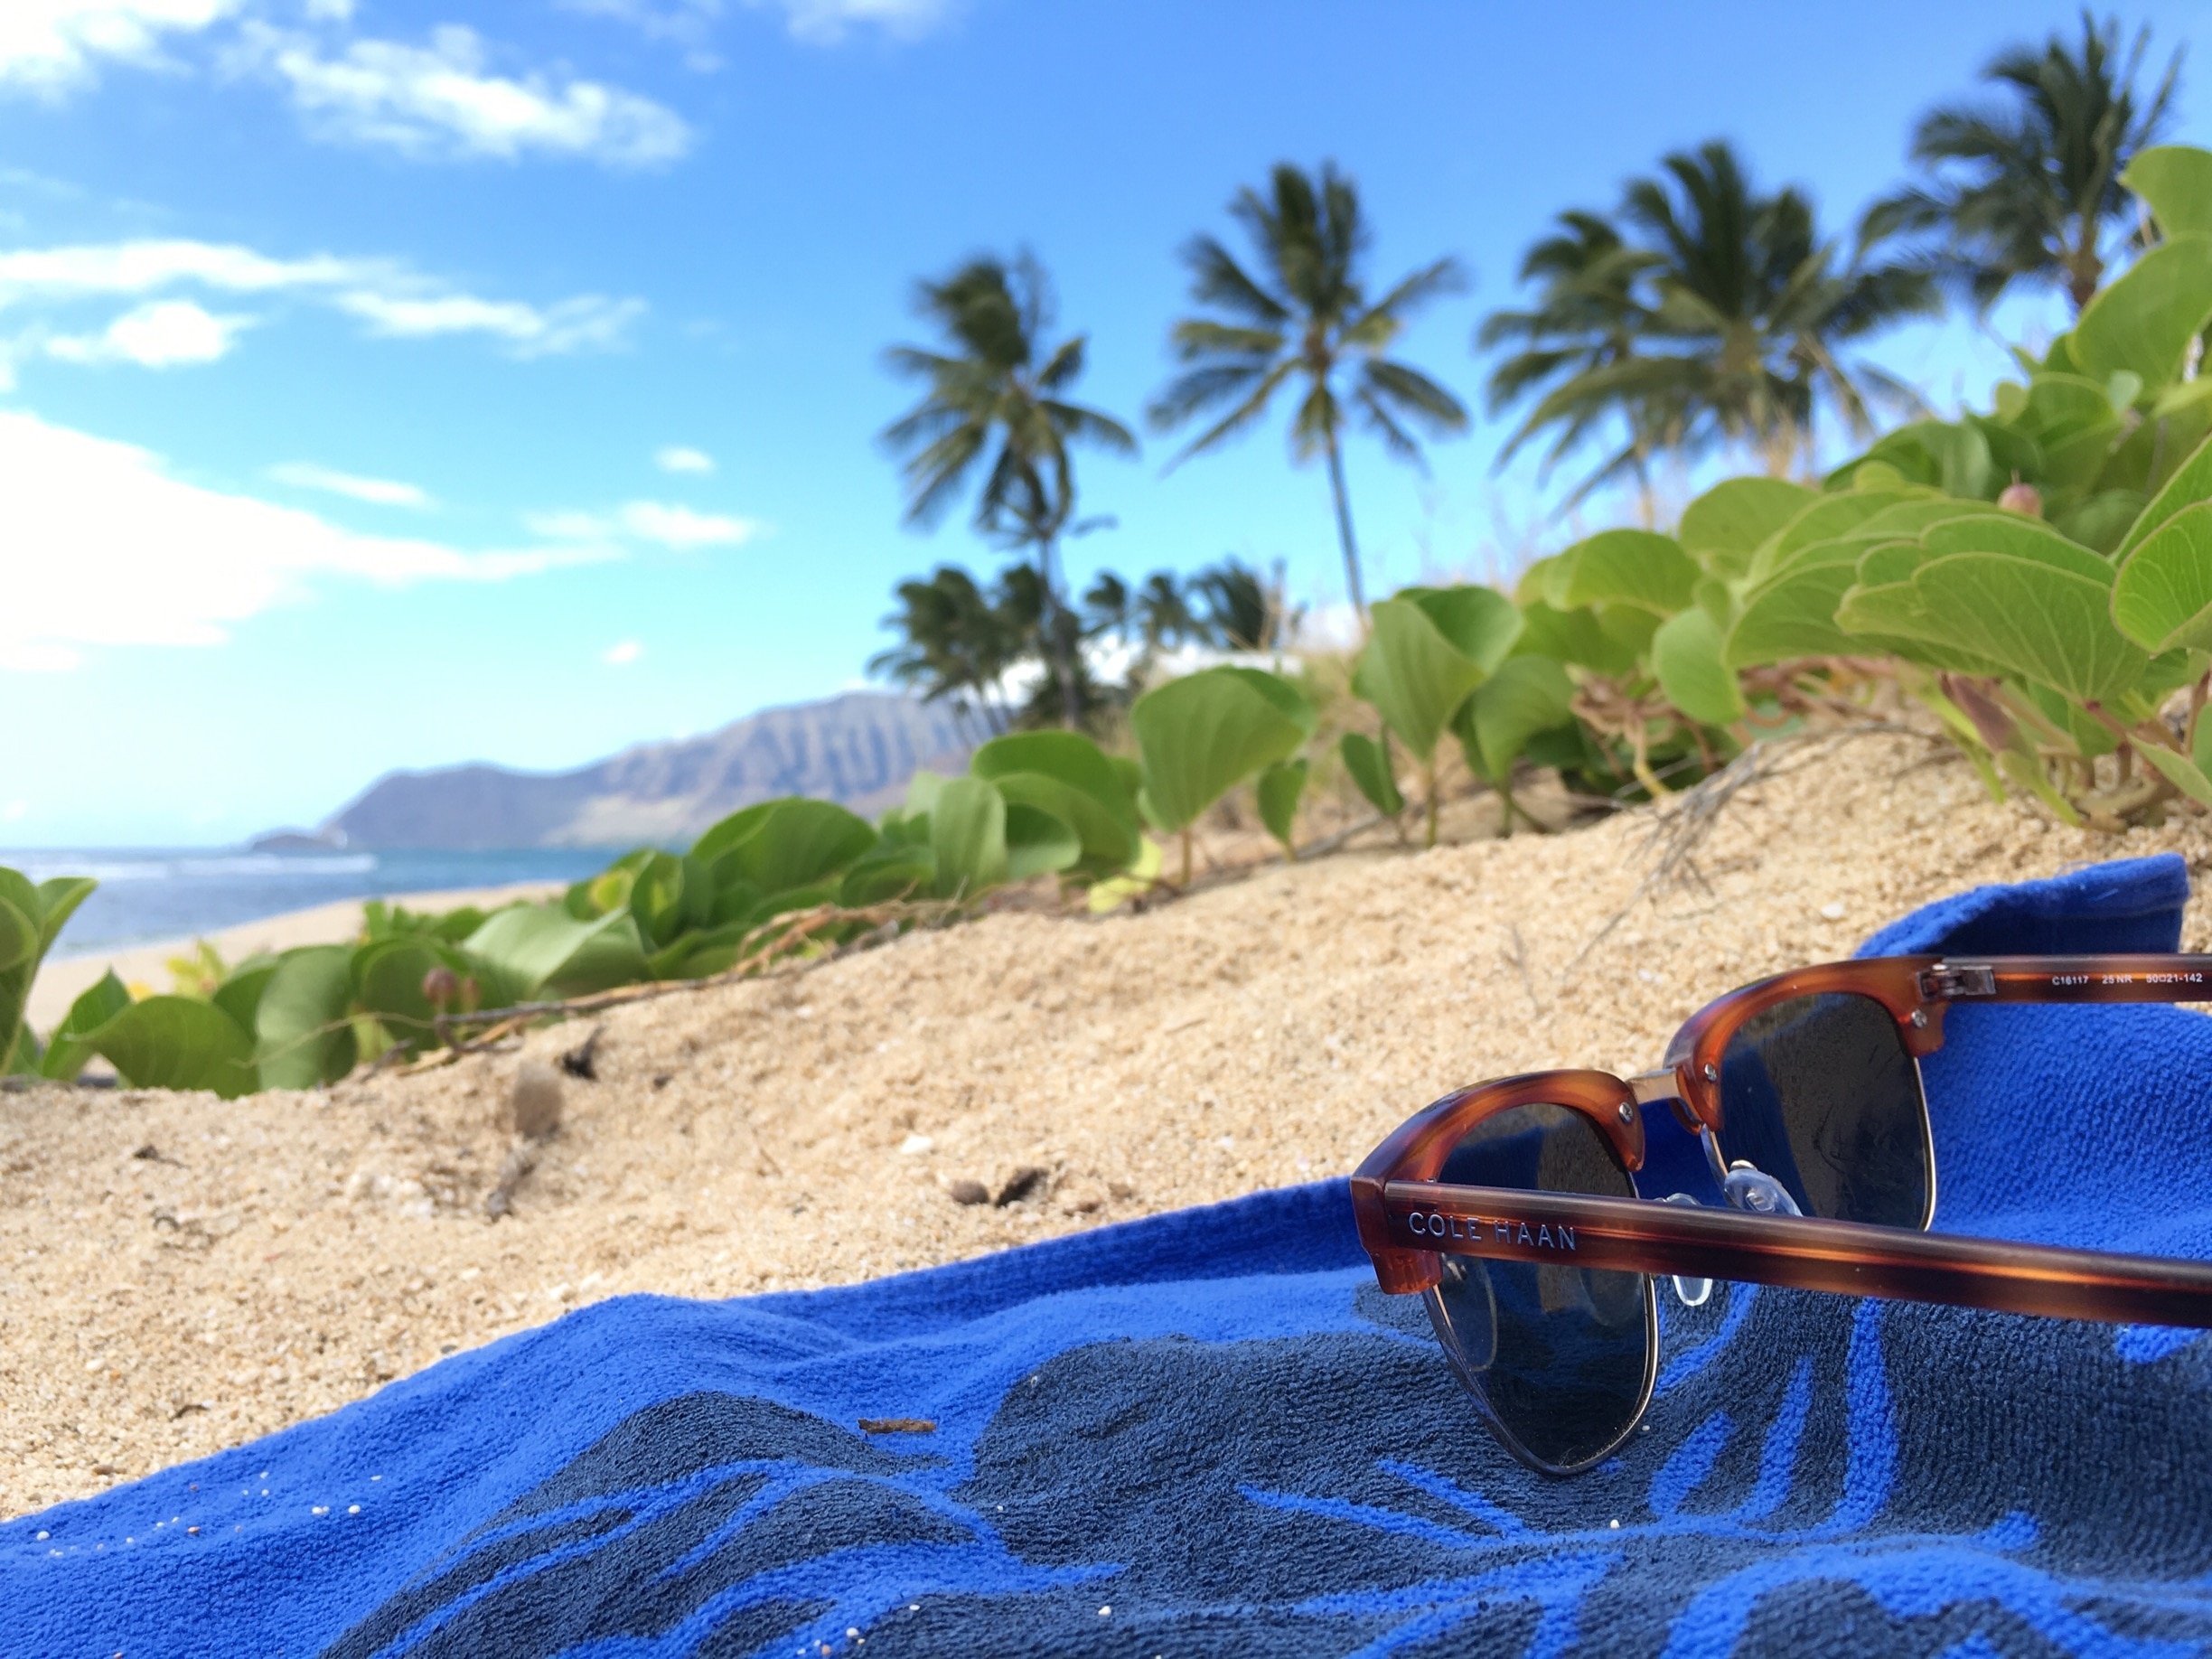 Sand, palms, blue skies and sunglasses are all you need for a good beach day! #LifeatExpedia